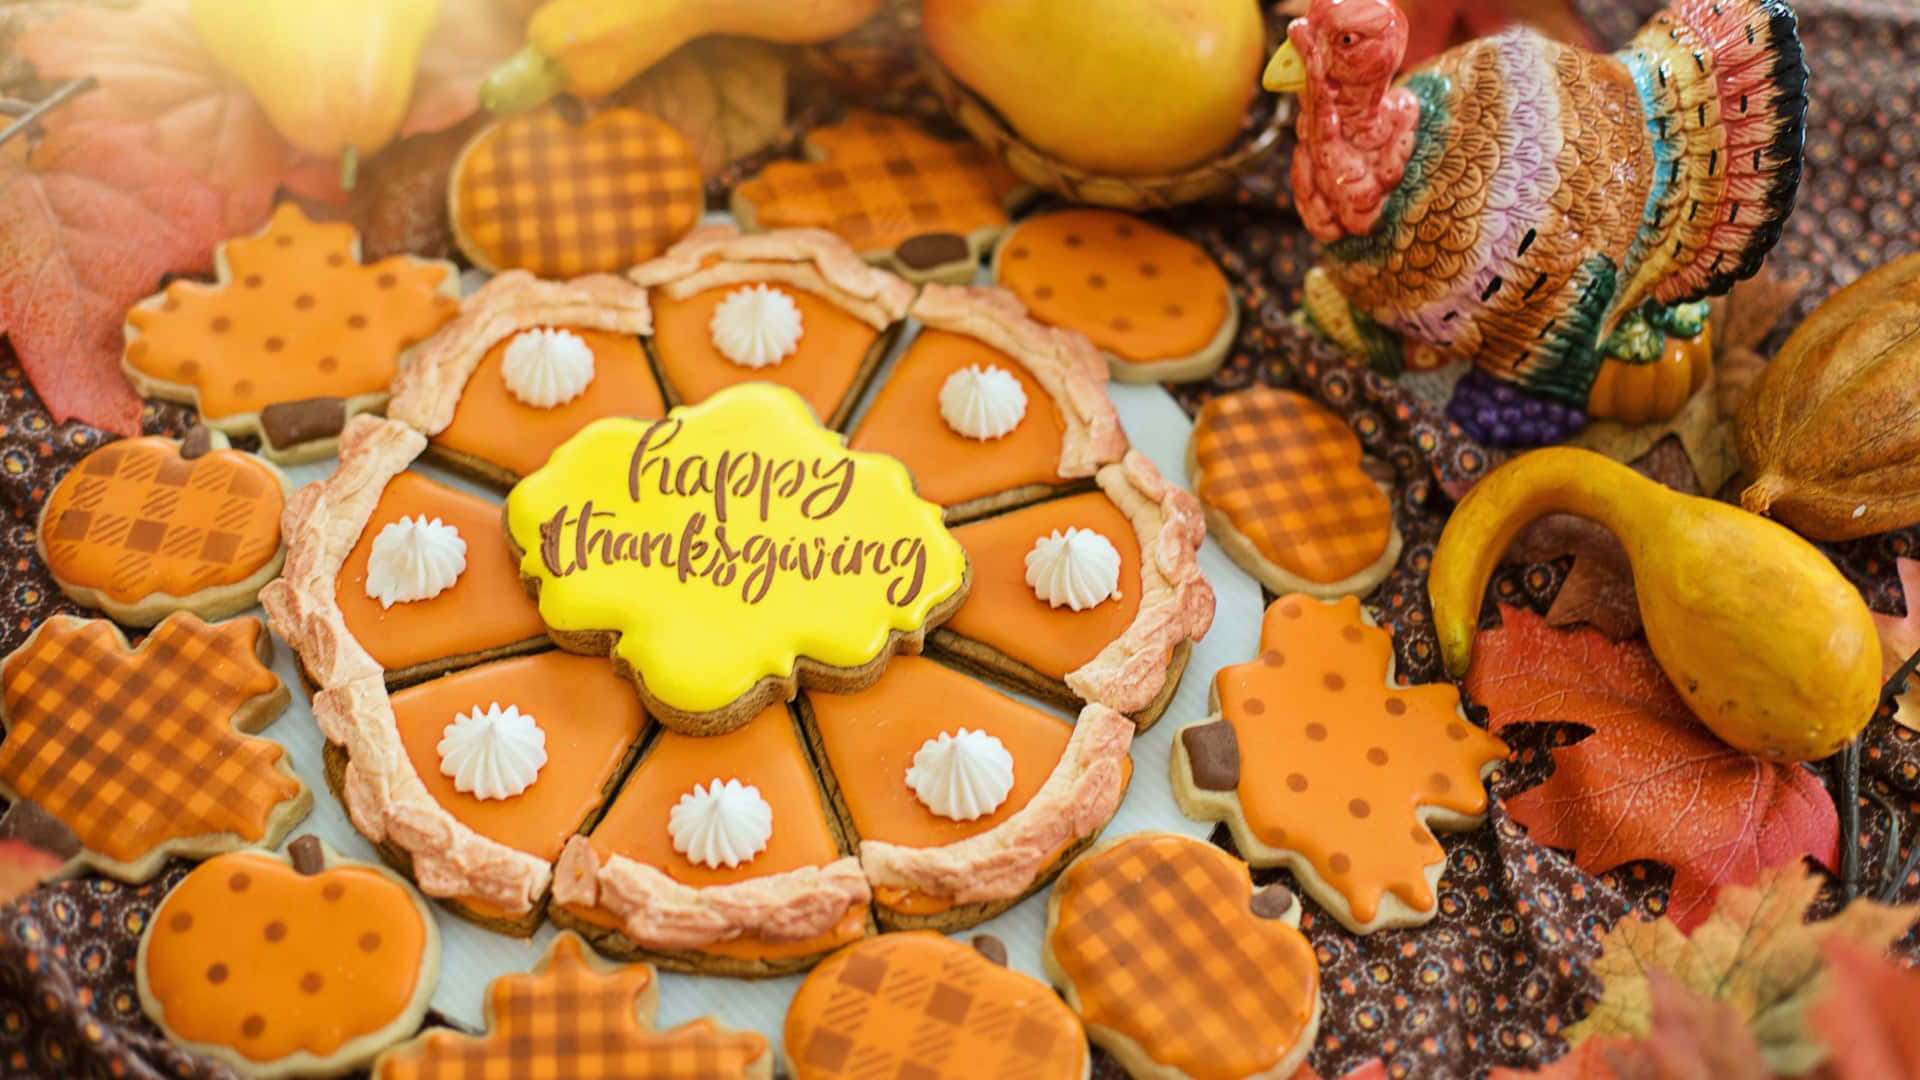 Celebrate Thanksgiving with Friends and Family Wallpaper